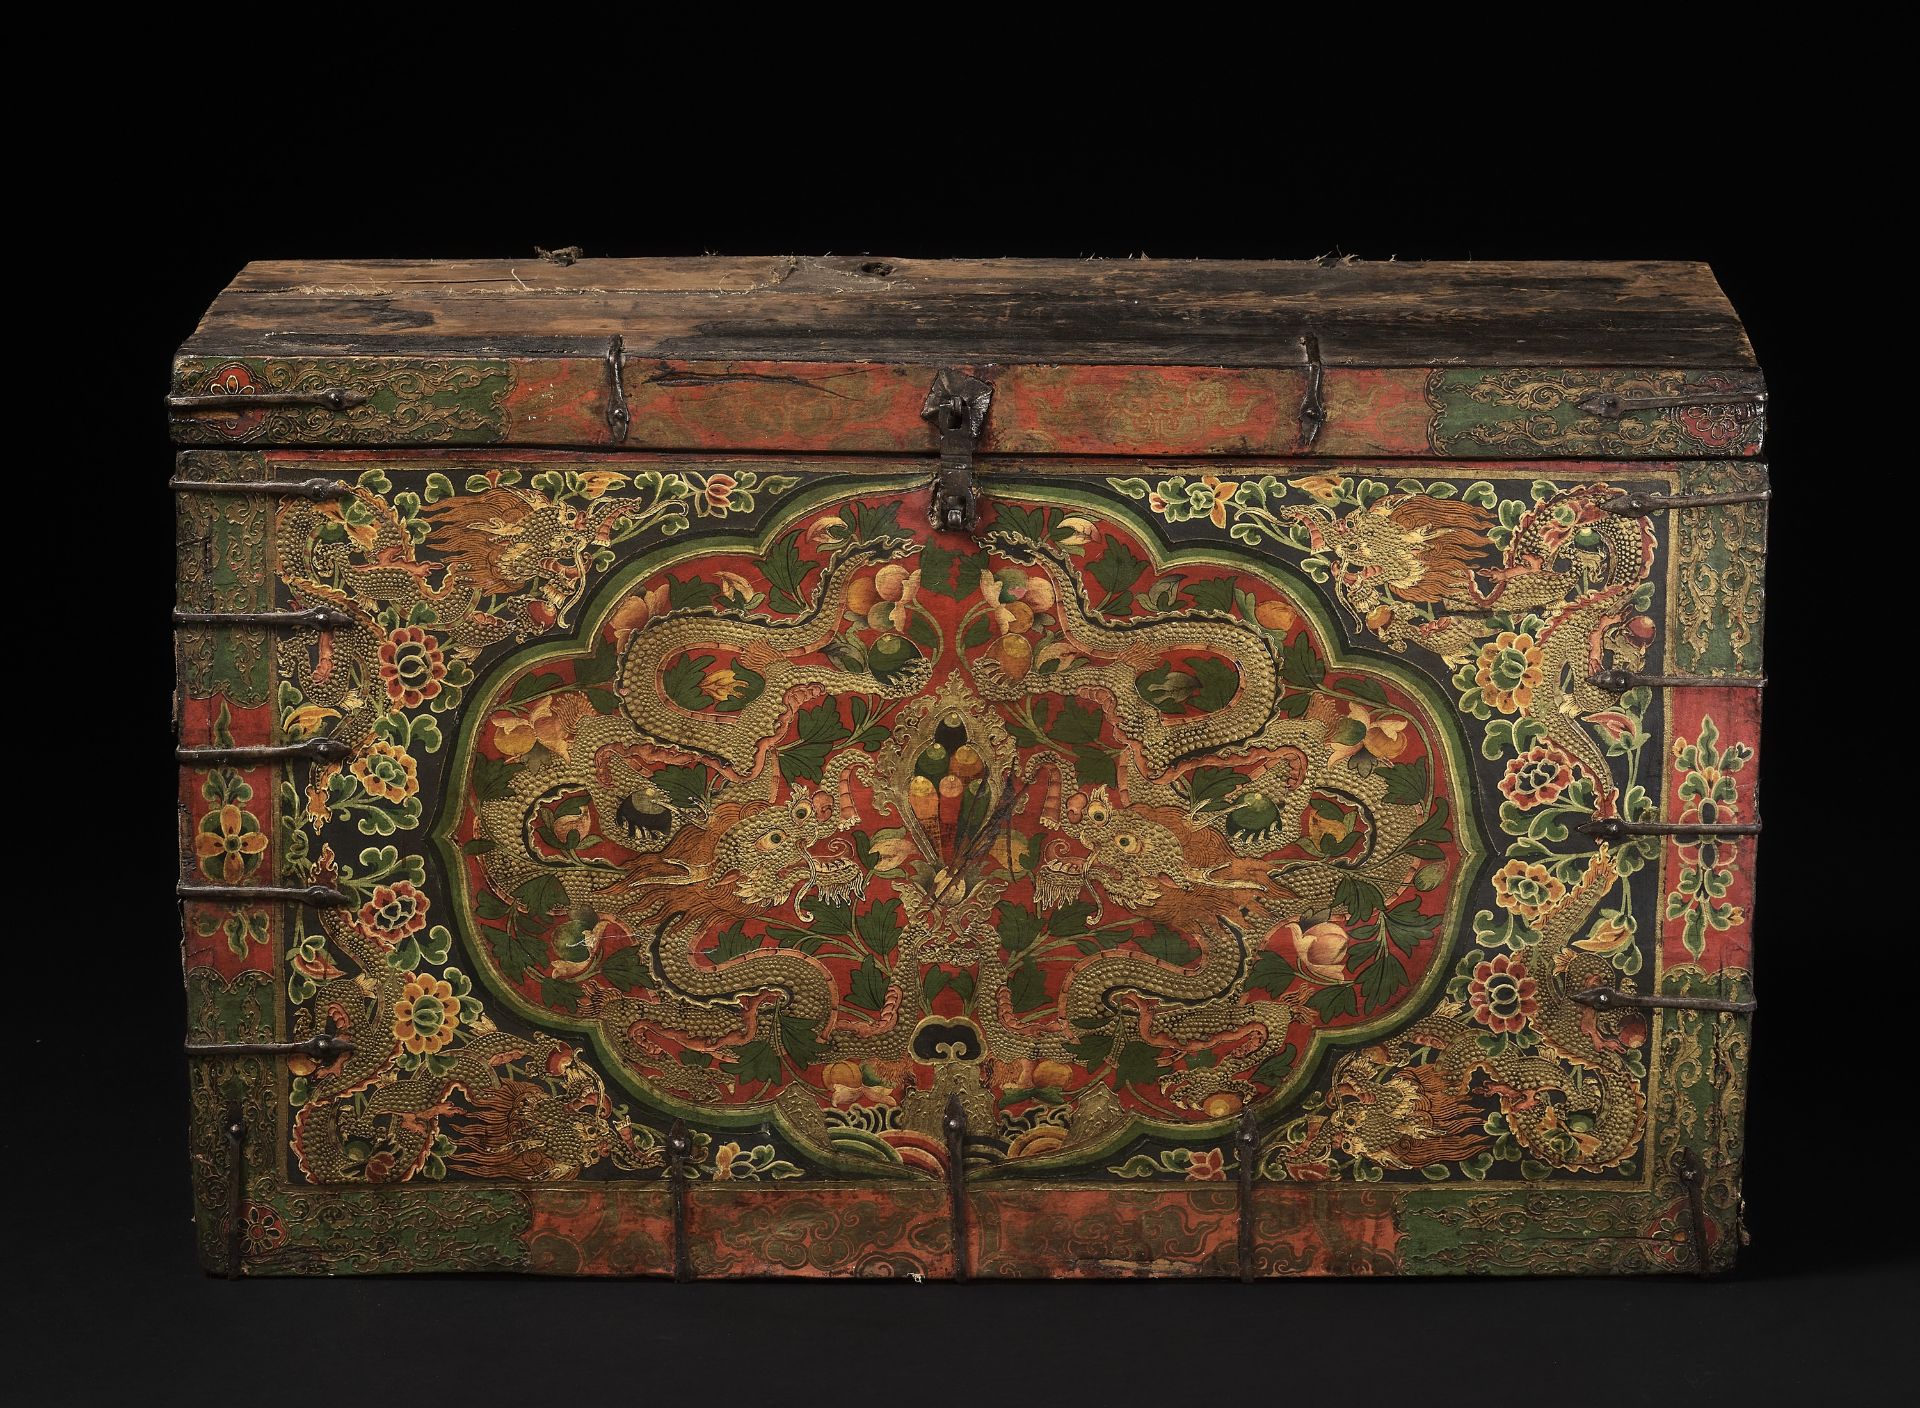 A LARGE PAINTED WOOD 'DRAGON' STORAGE CHEST, 19TH CENTURY